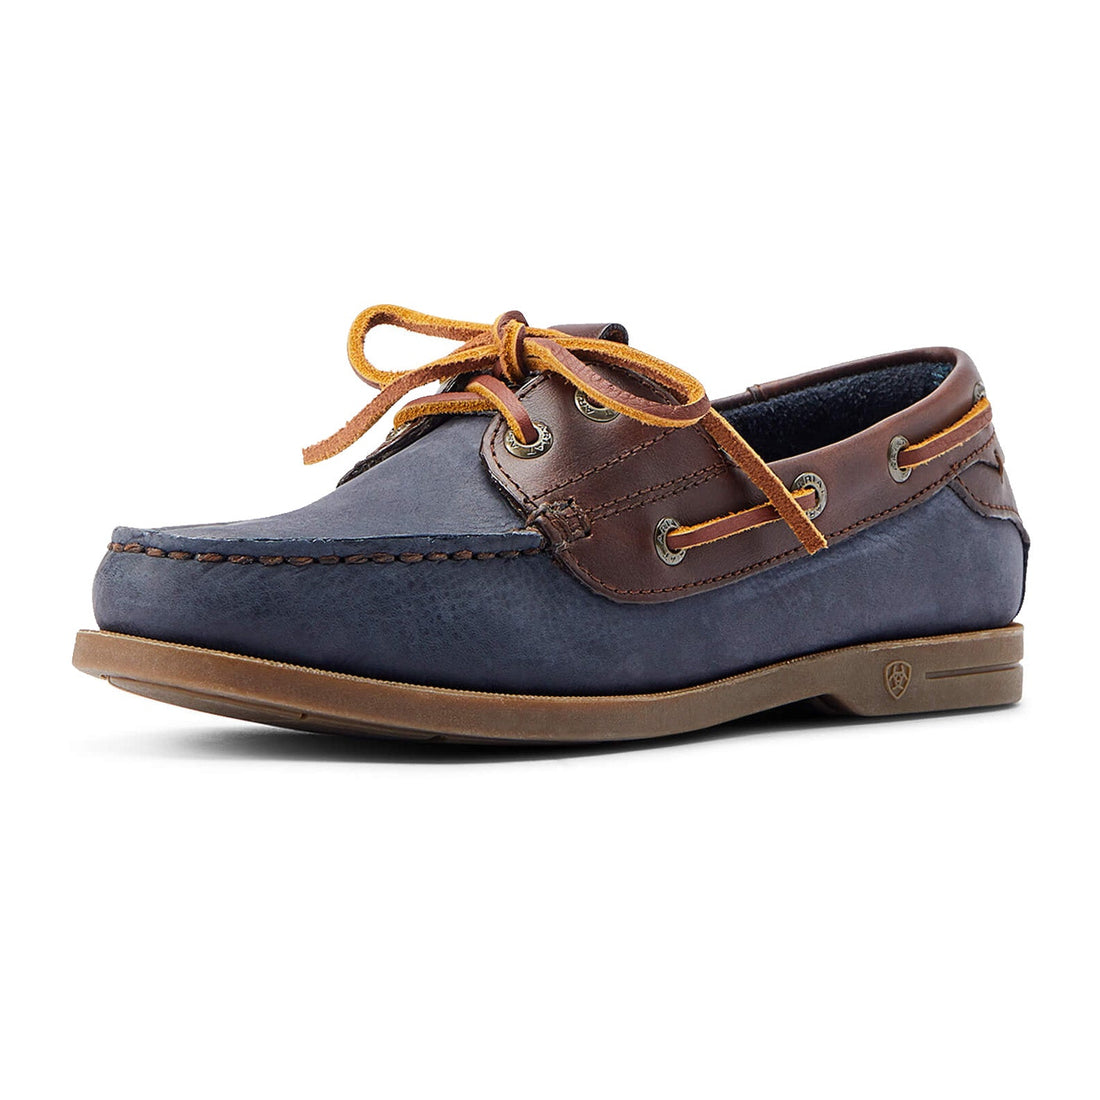 Ariat-Womens-Antigua-Boat-Shoes